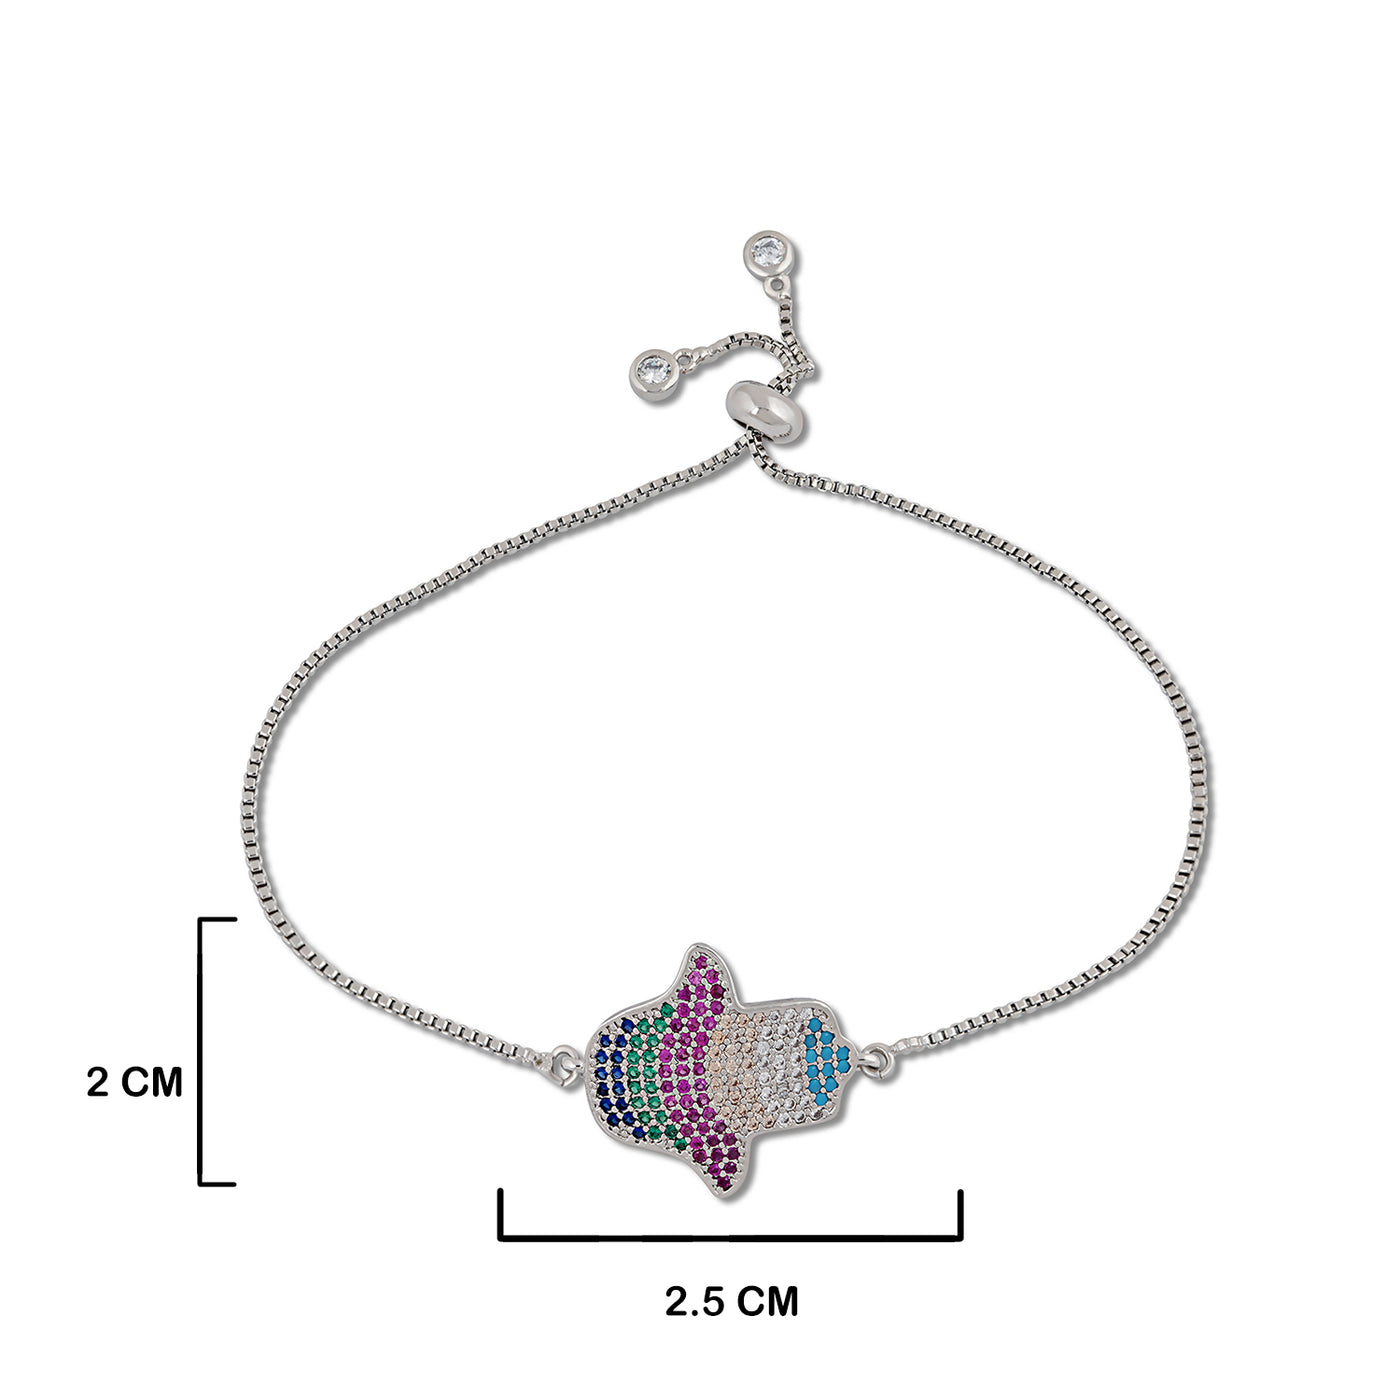 Multi Coloured Bead Bracelet with measurements in cm. 2cm by 2.5cm.